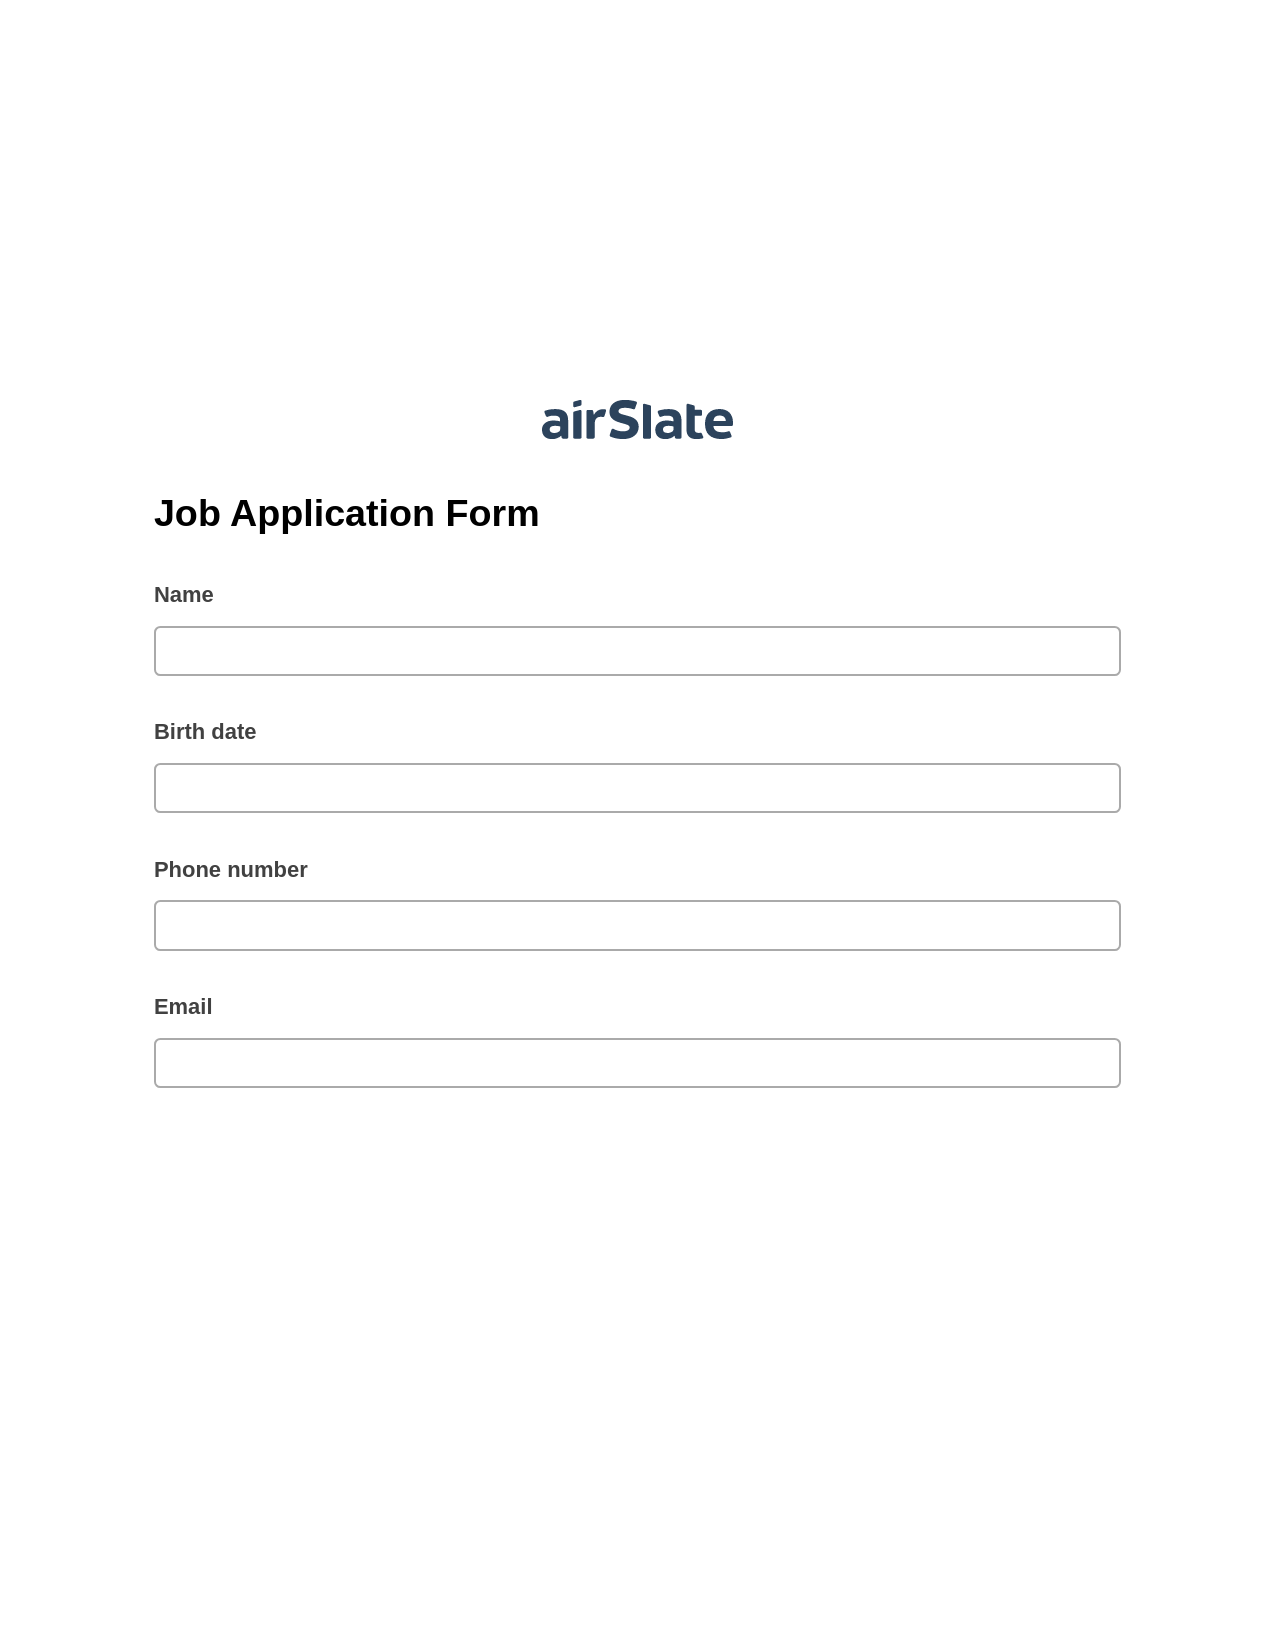 Job Application Form Pre-fill from another Slate Bot, Create NetSuite Records Bot, Export to Formstack Documents Bot